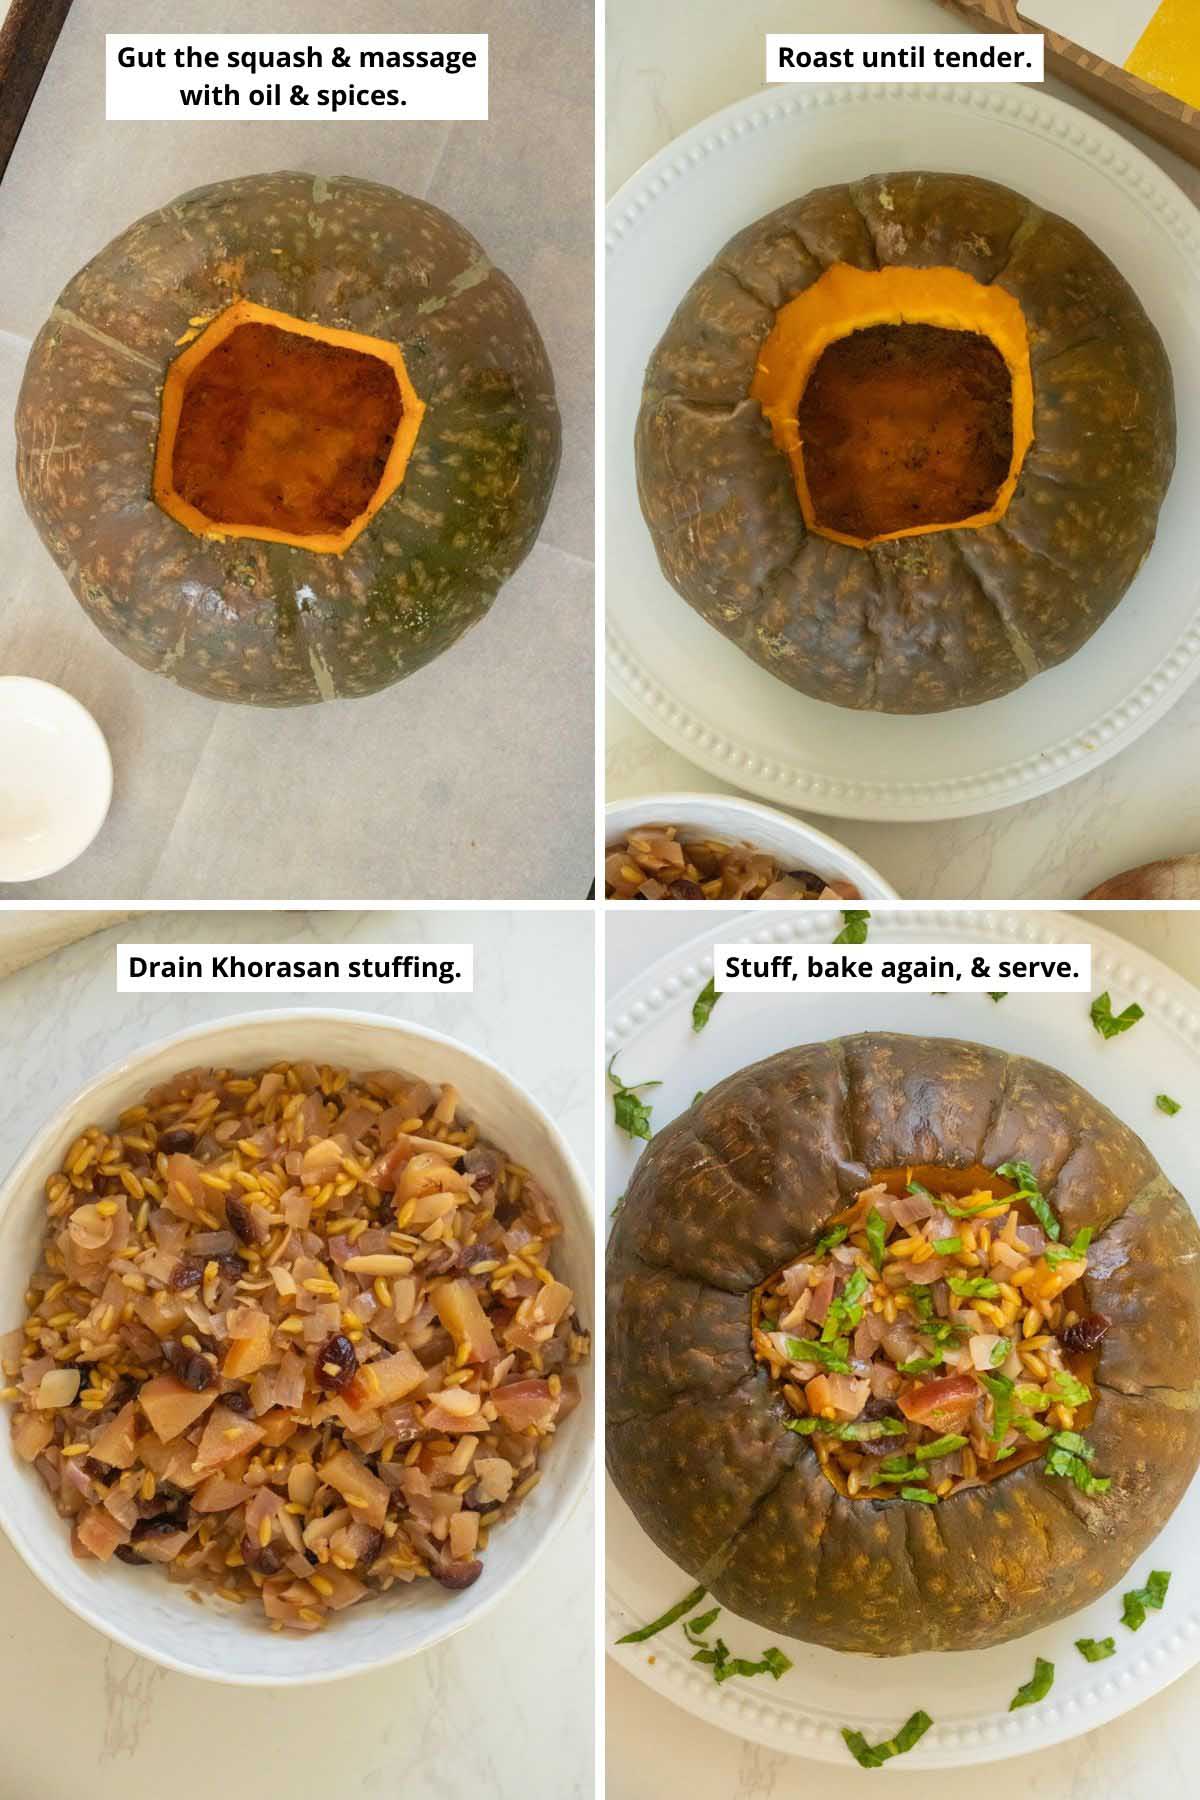 image collage showing the kabocha pumpkin before and after roasting and the stuffing before and after adding to the roasted squash